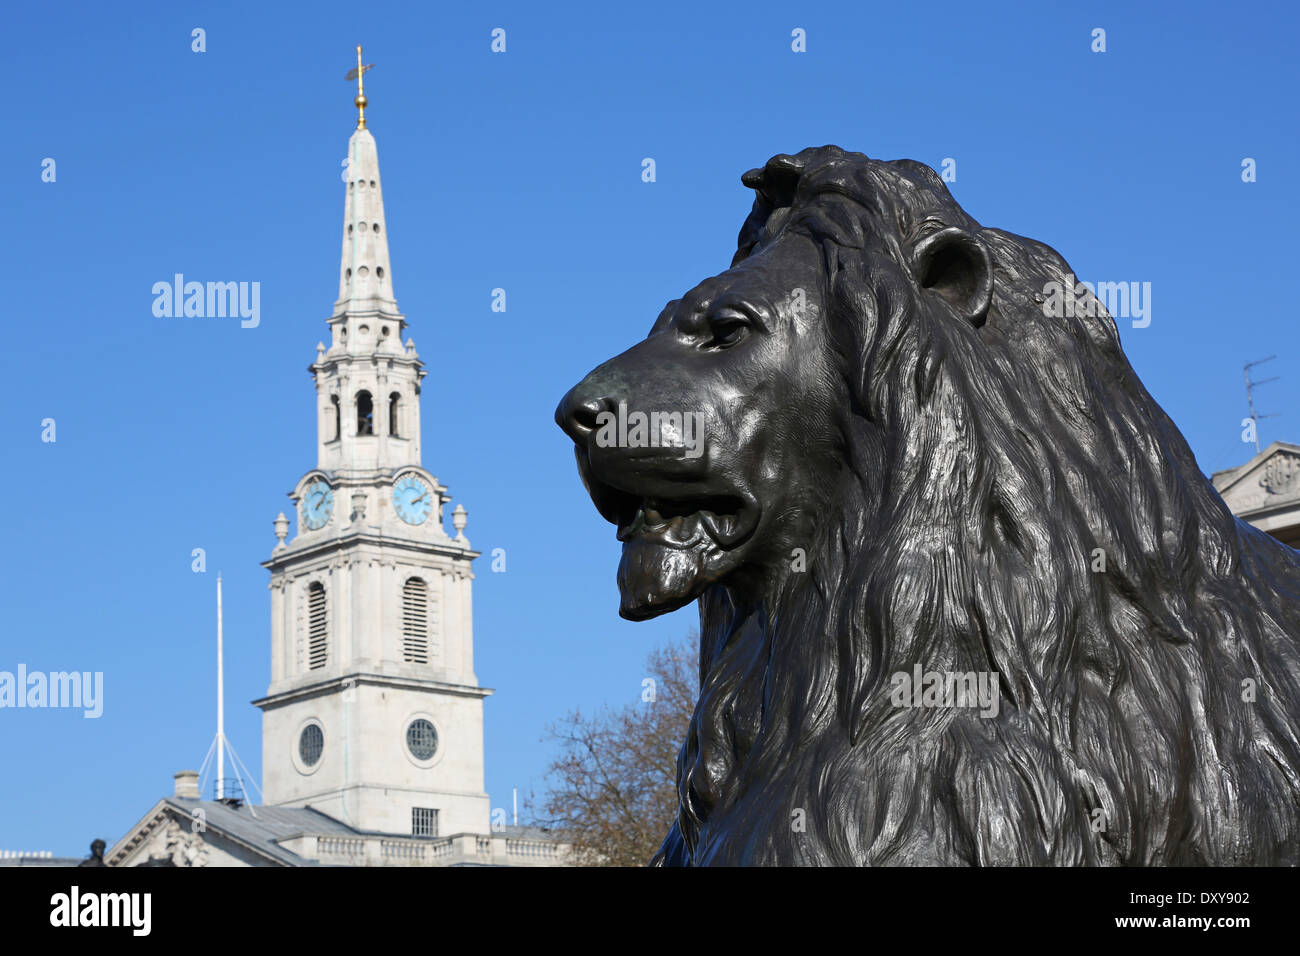 Statue of lion by Landseer beneath Nelson's Column and St Martins in the Fields church in Trafalgar Square, London, England Stock Photo